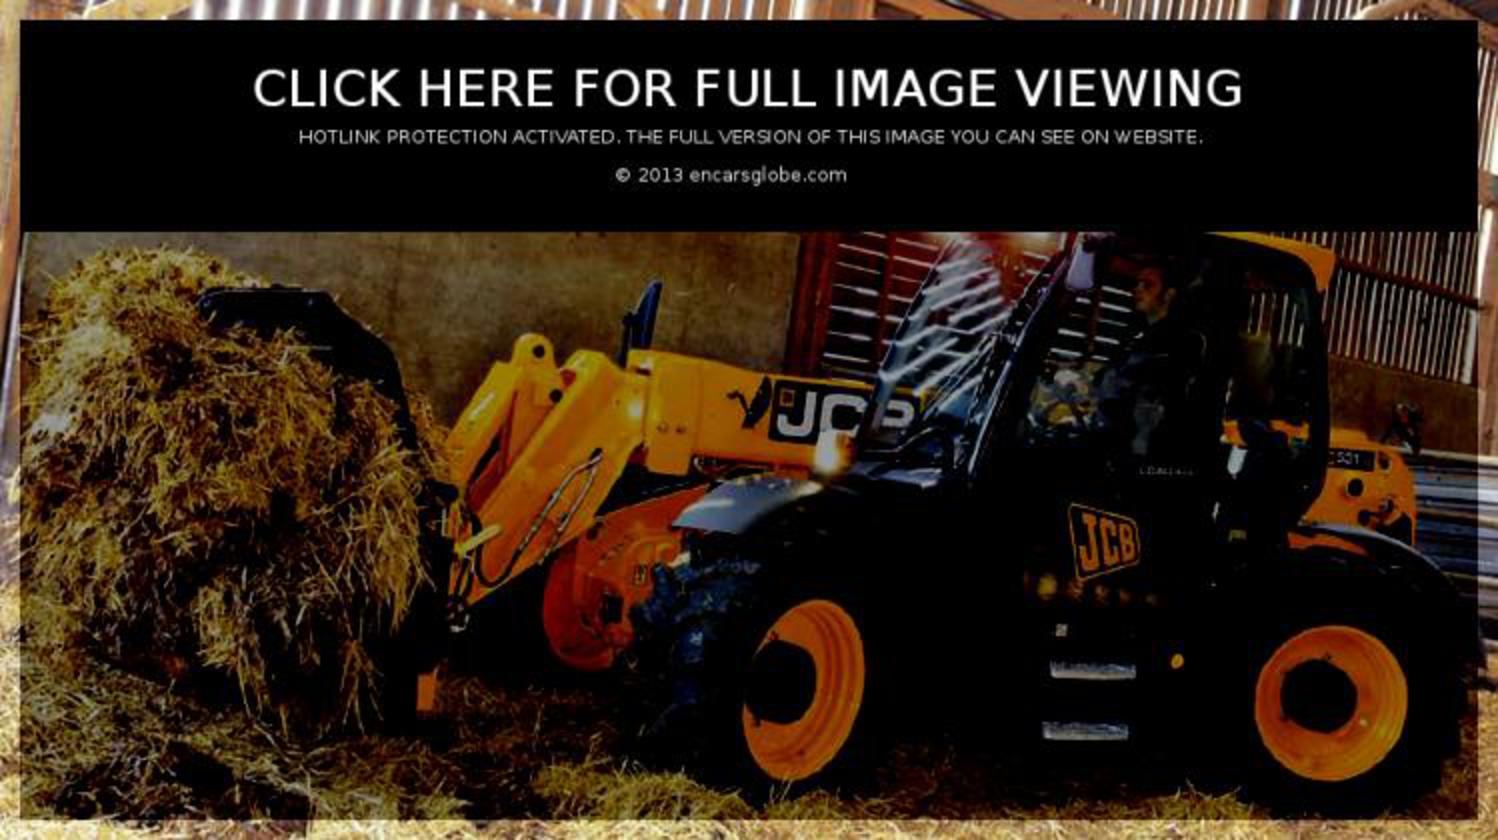 JCB Loadall Photo Gallery: Photo #12 out of 9, Image Size - 749 x ...